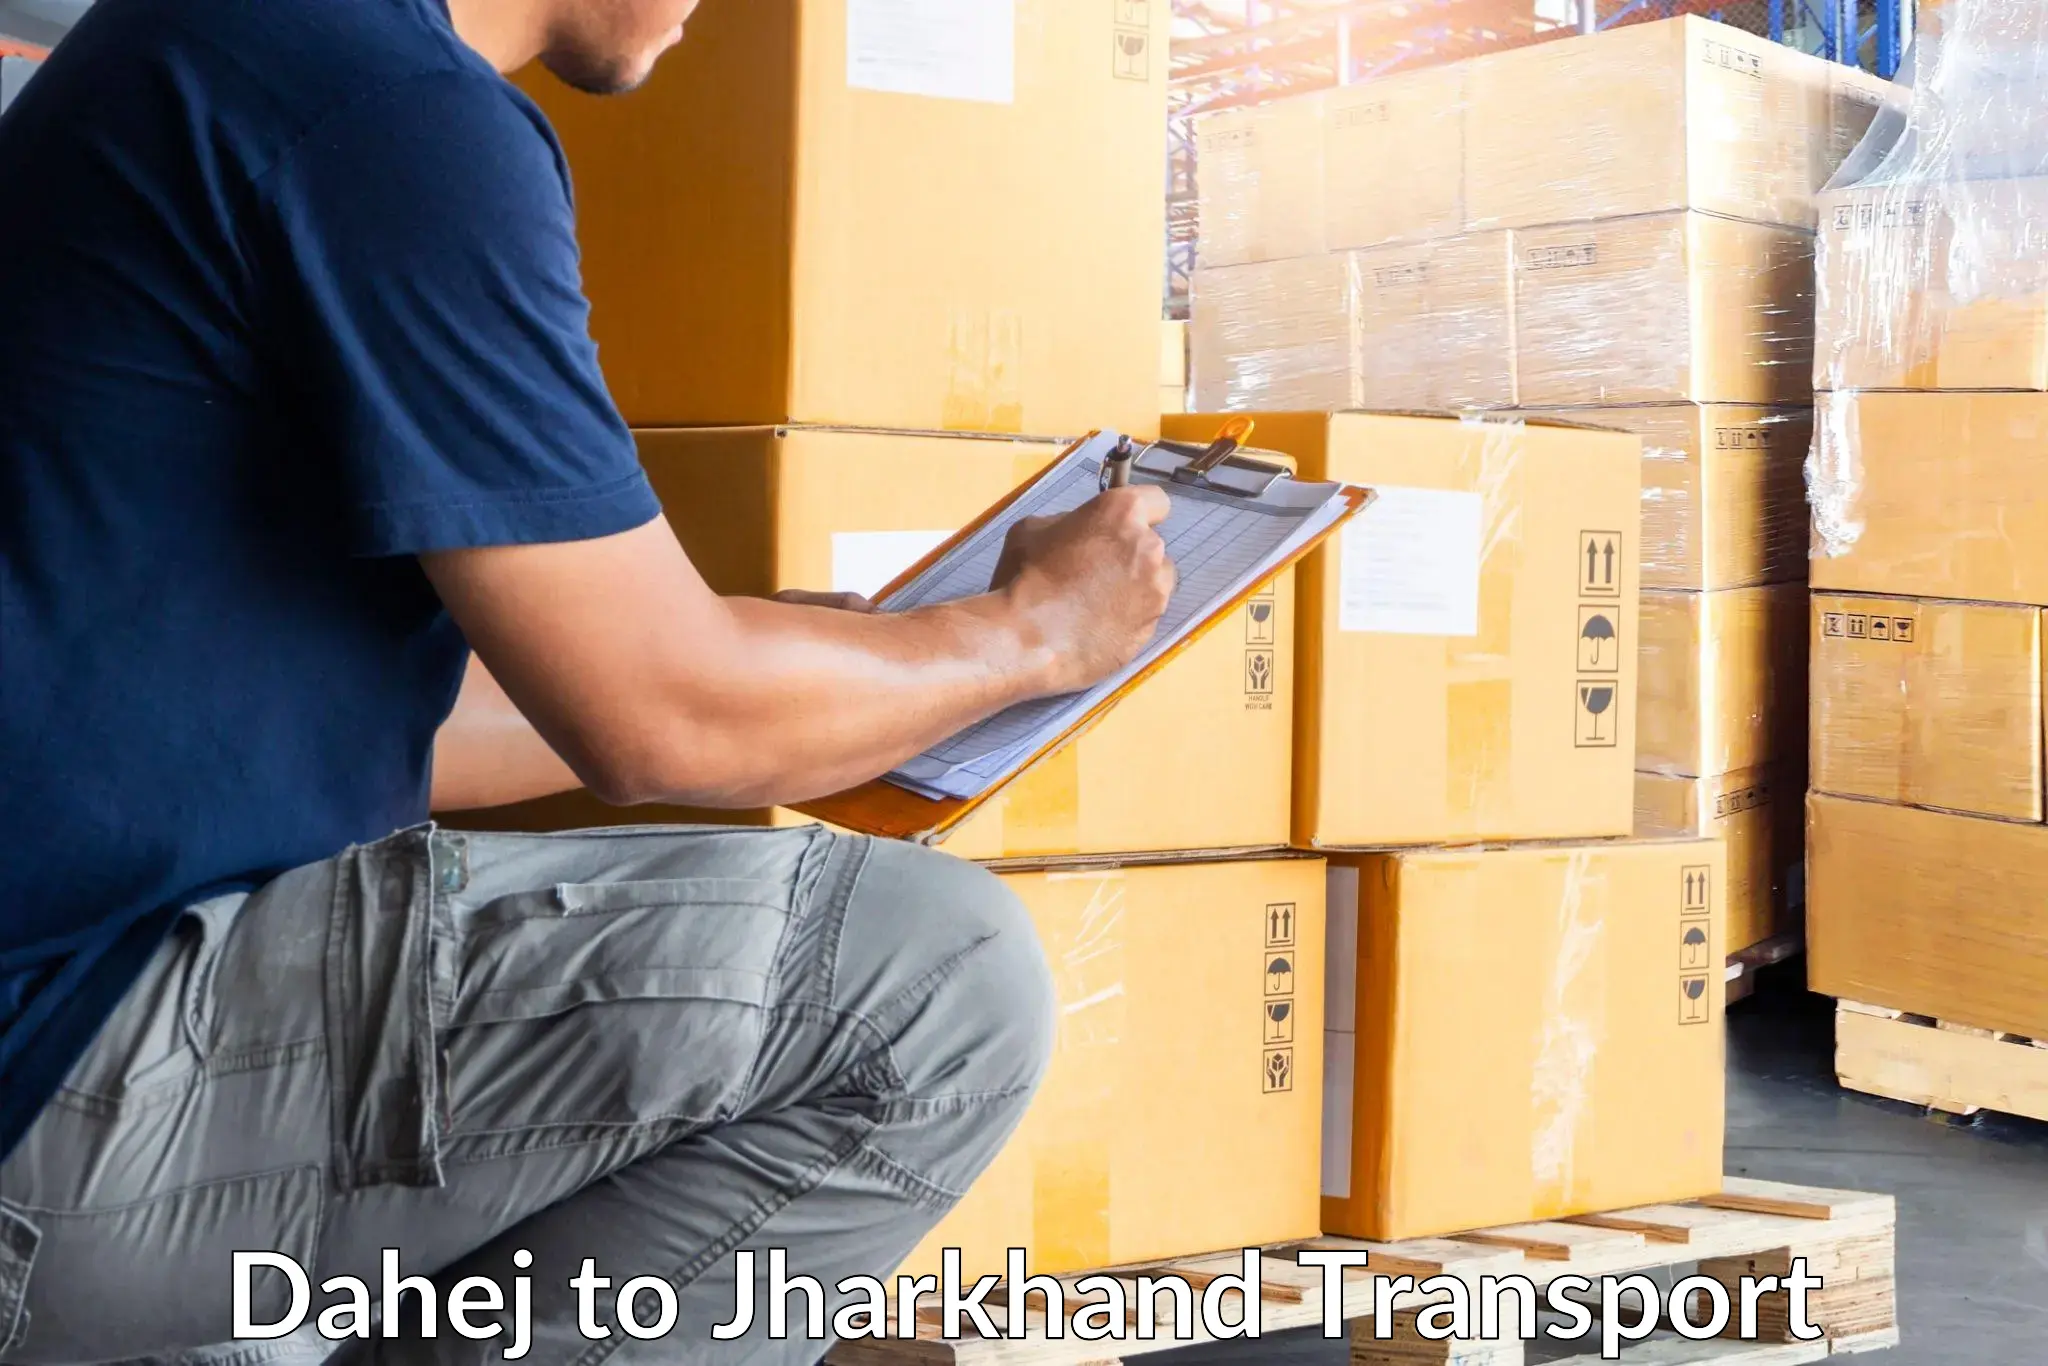 Shipping services Dahej to Jamshedpur